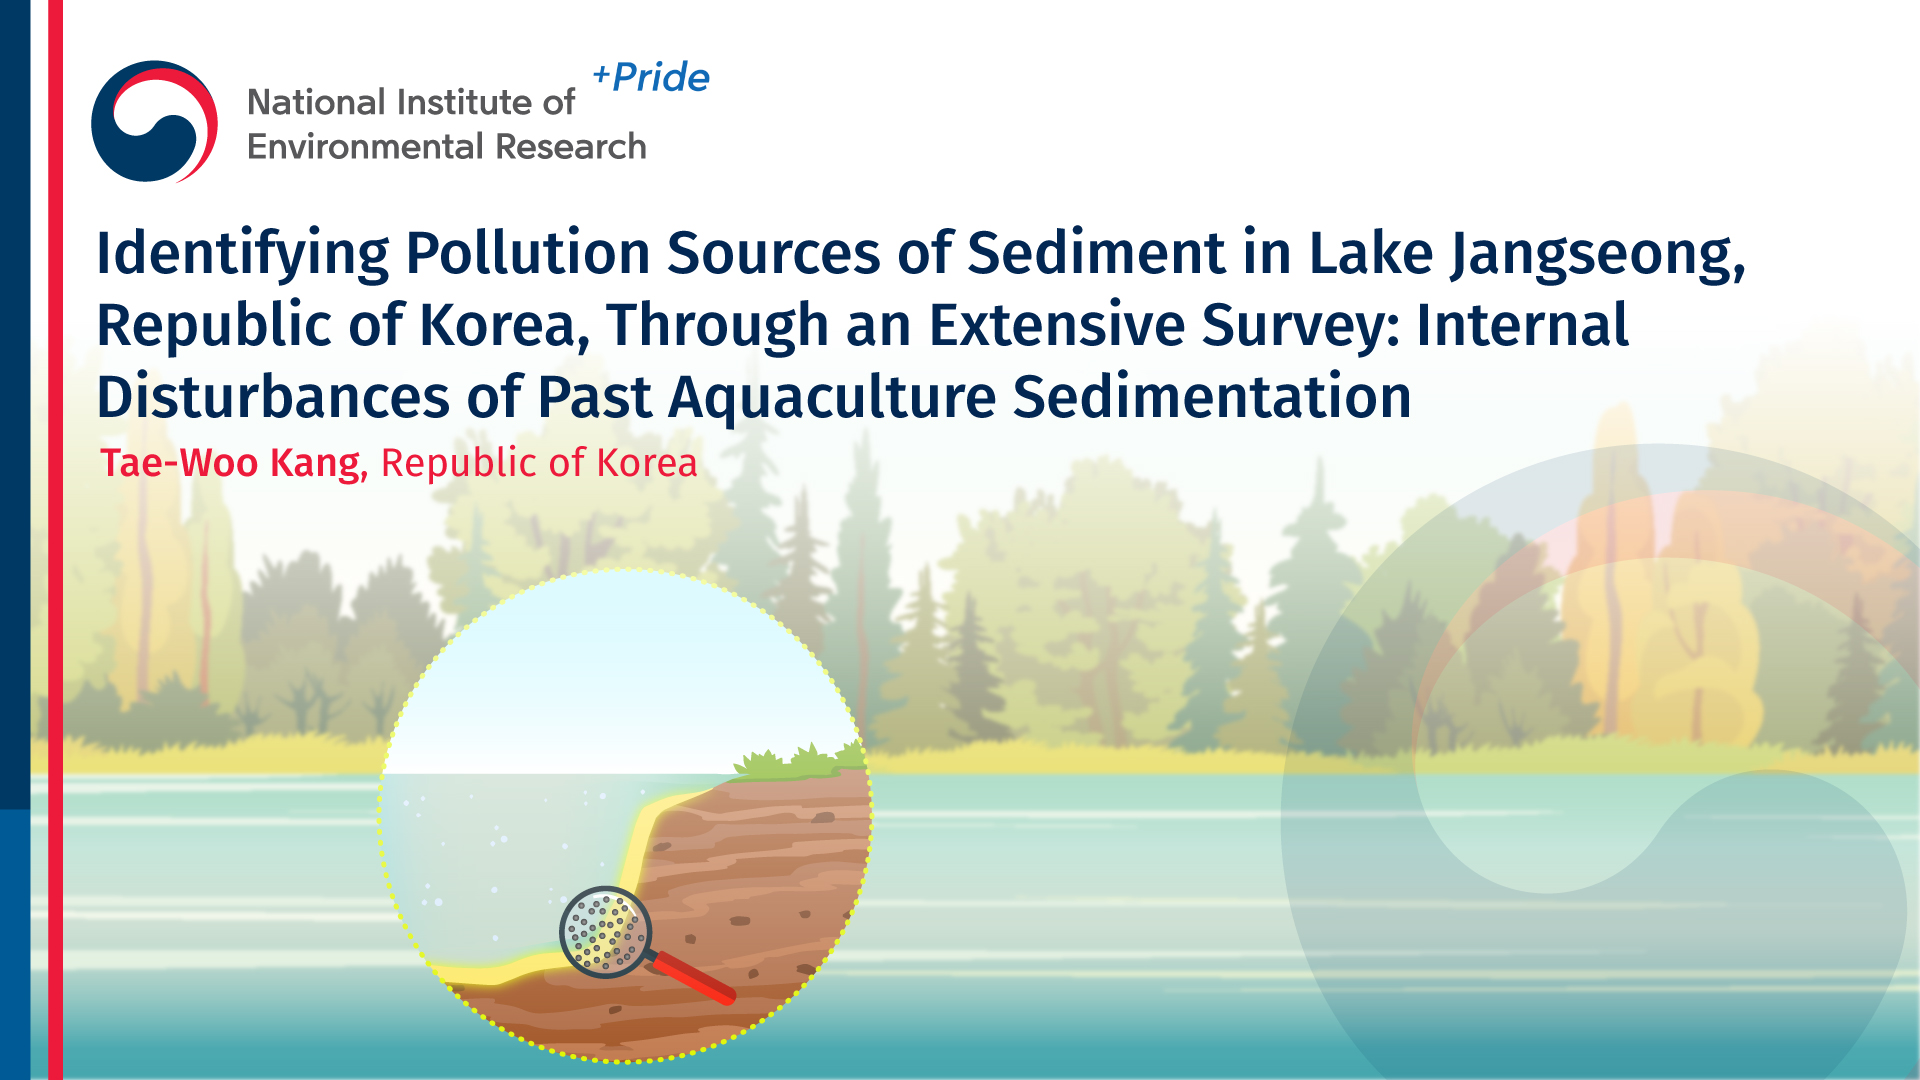 Identifying pollution sources of sediment in Lake Jangse